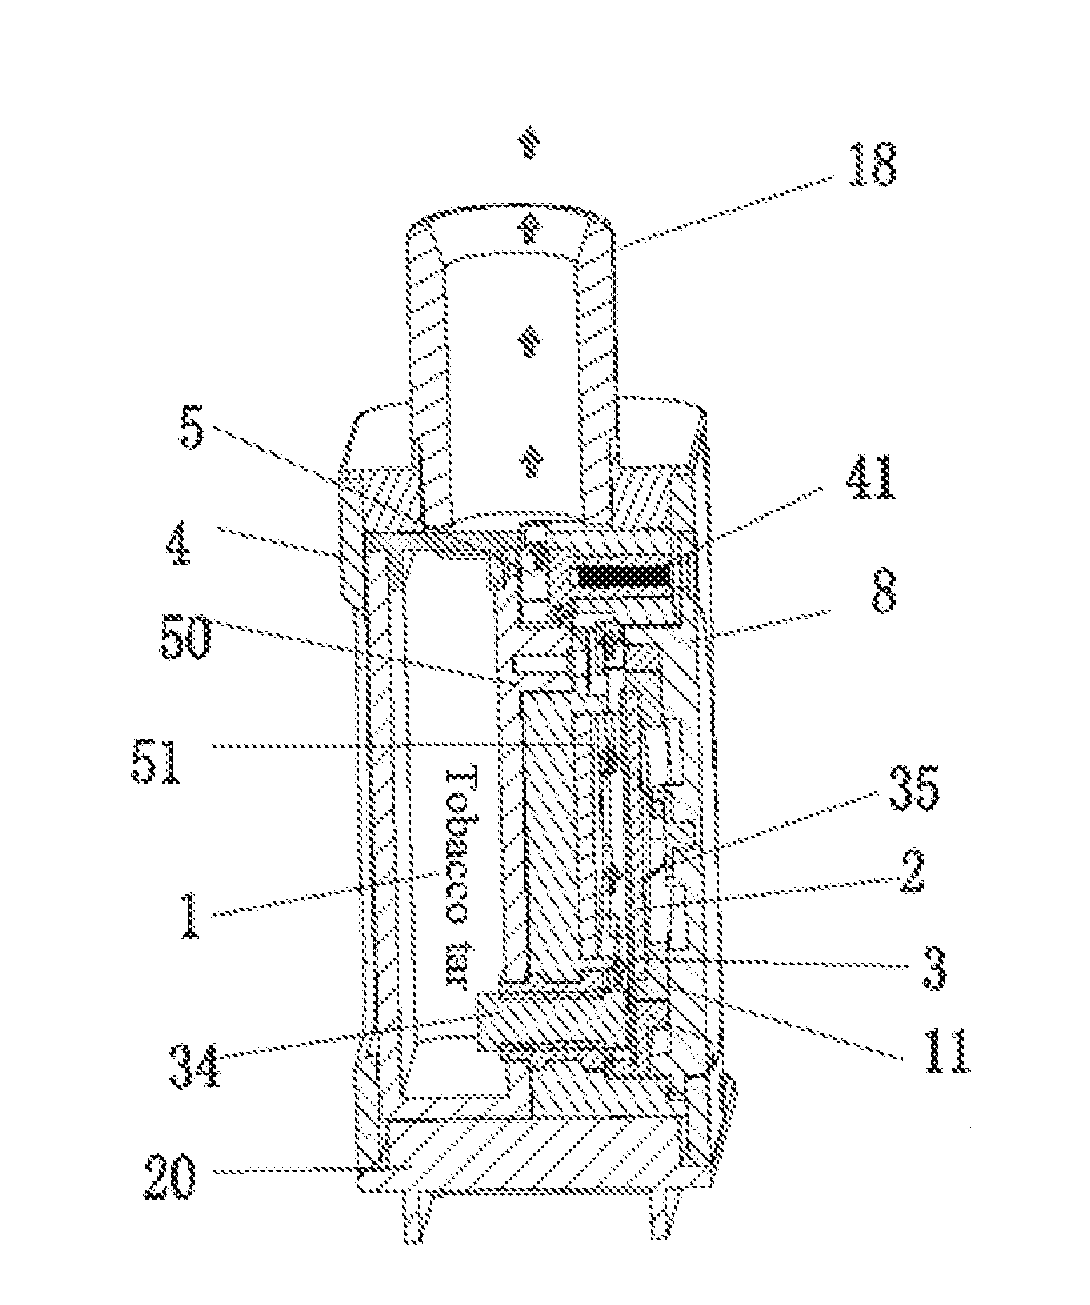 Ultrasonic atomizer and electronic cigarette